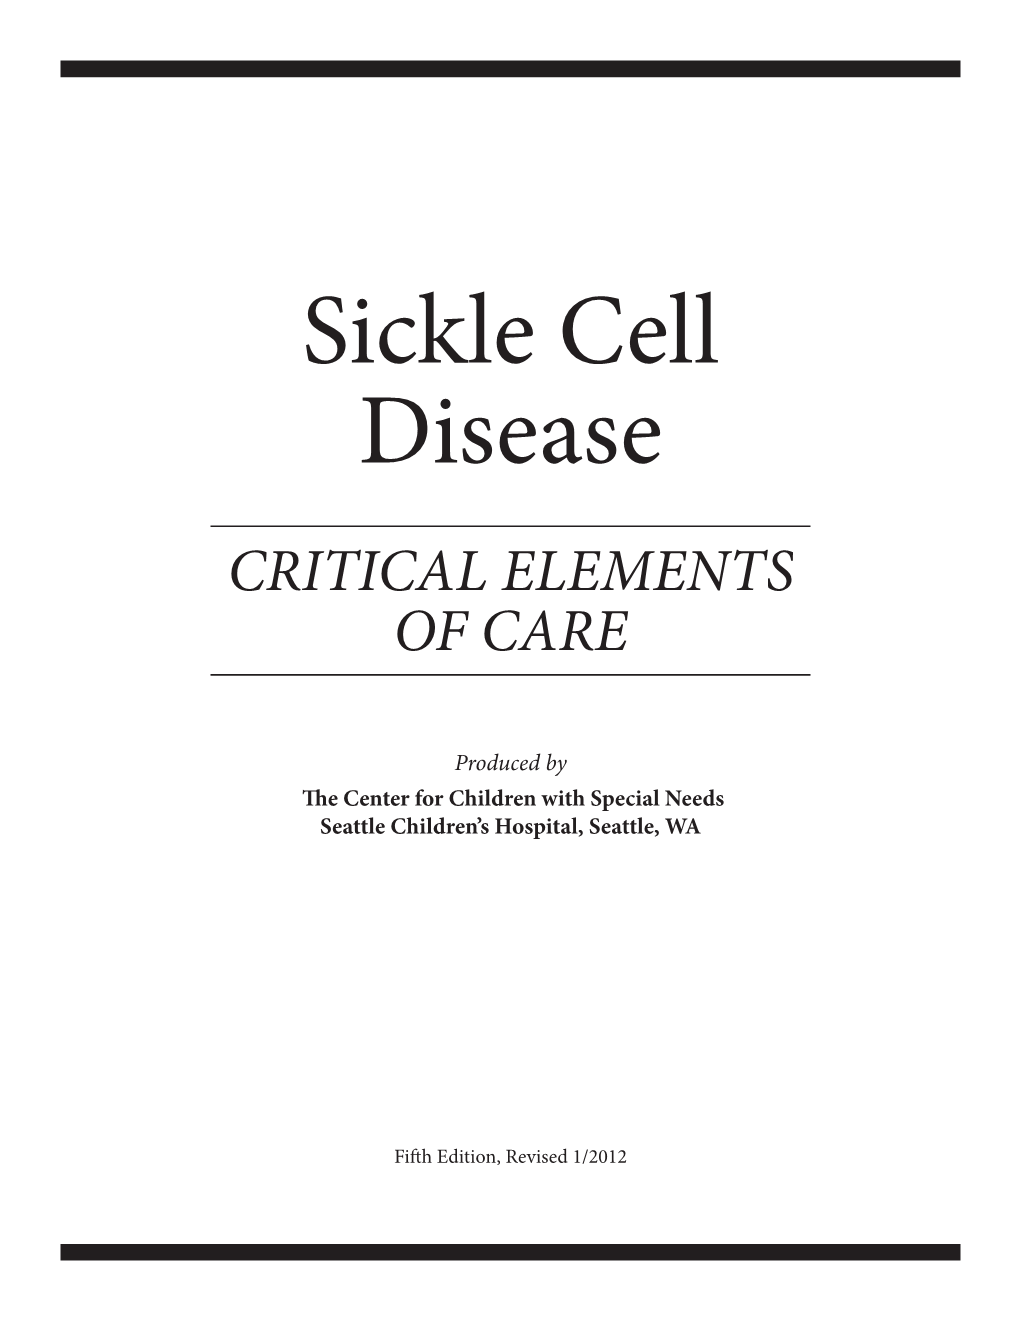 Critical Elements of Care: Sickle Cell Disease  I